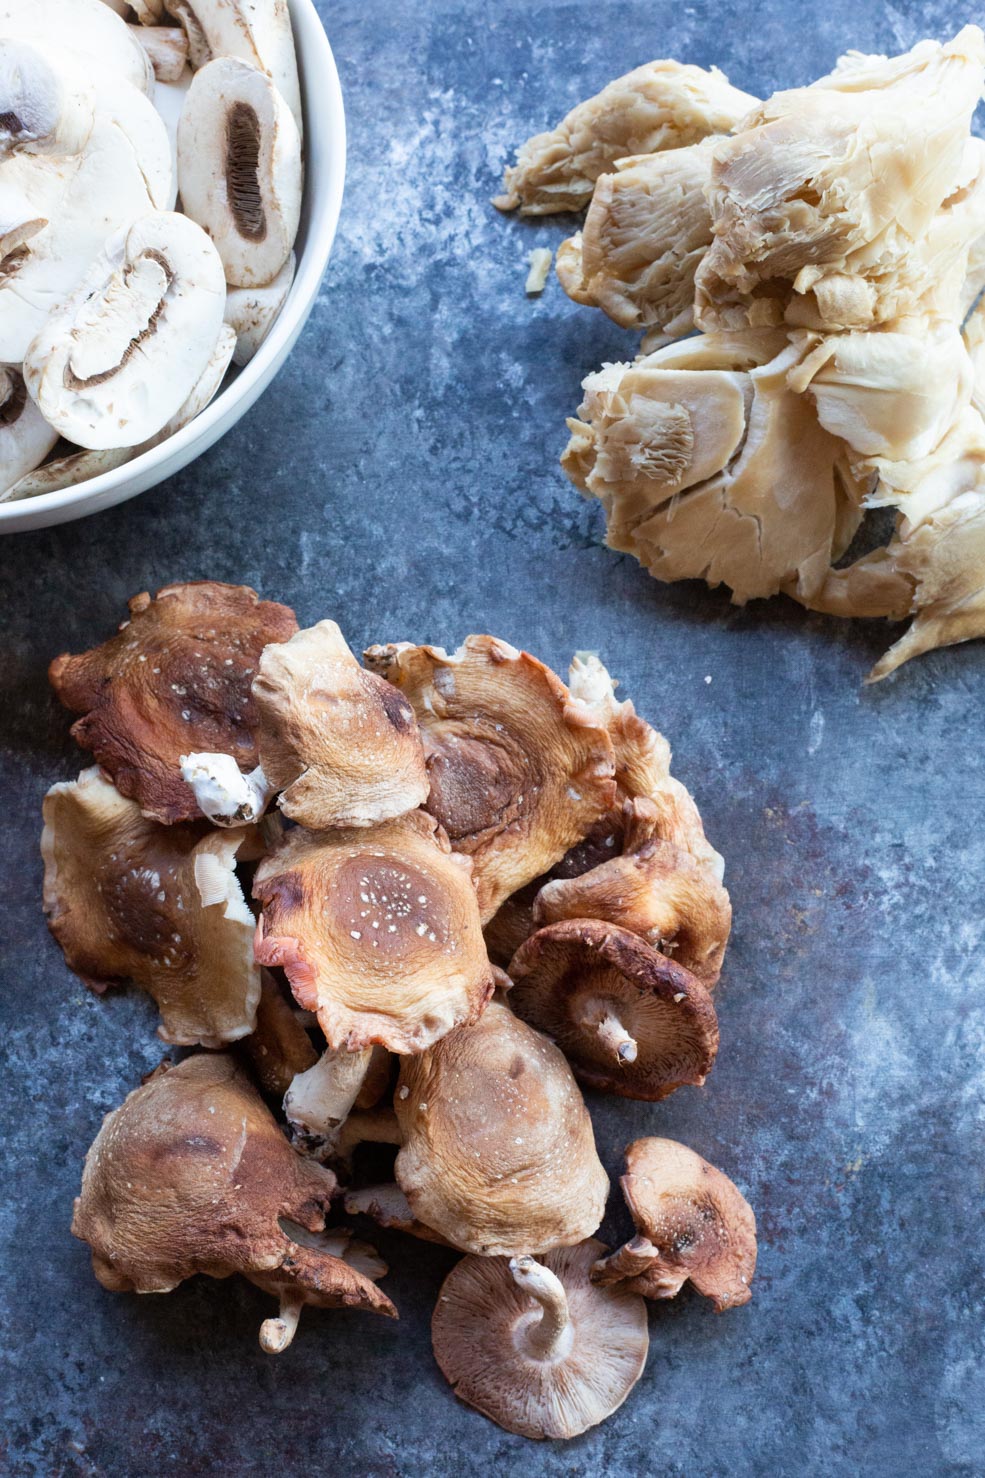 Shiitake, Oyster, and Button Mushrooms 